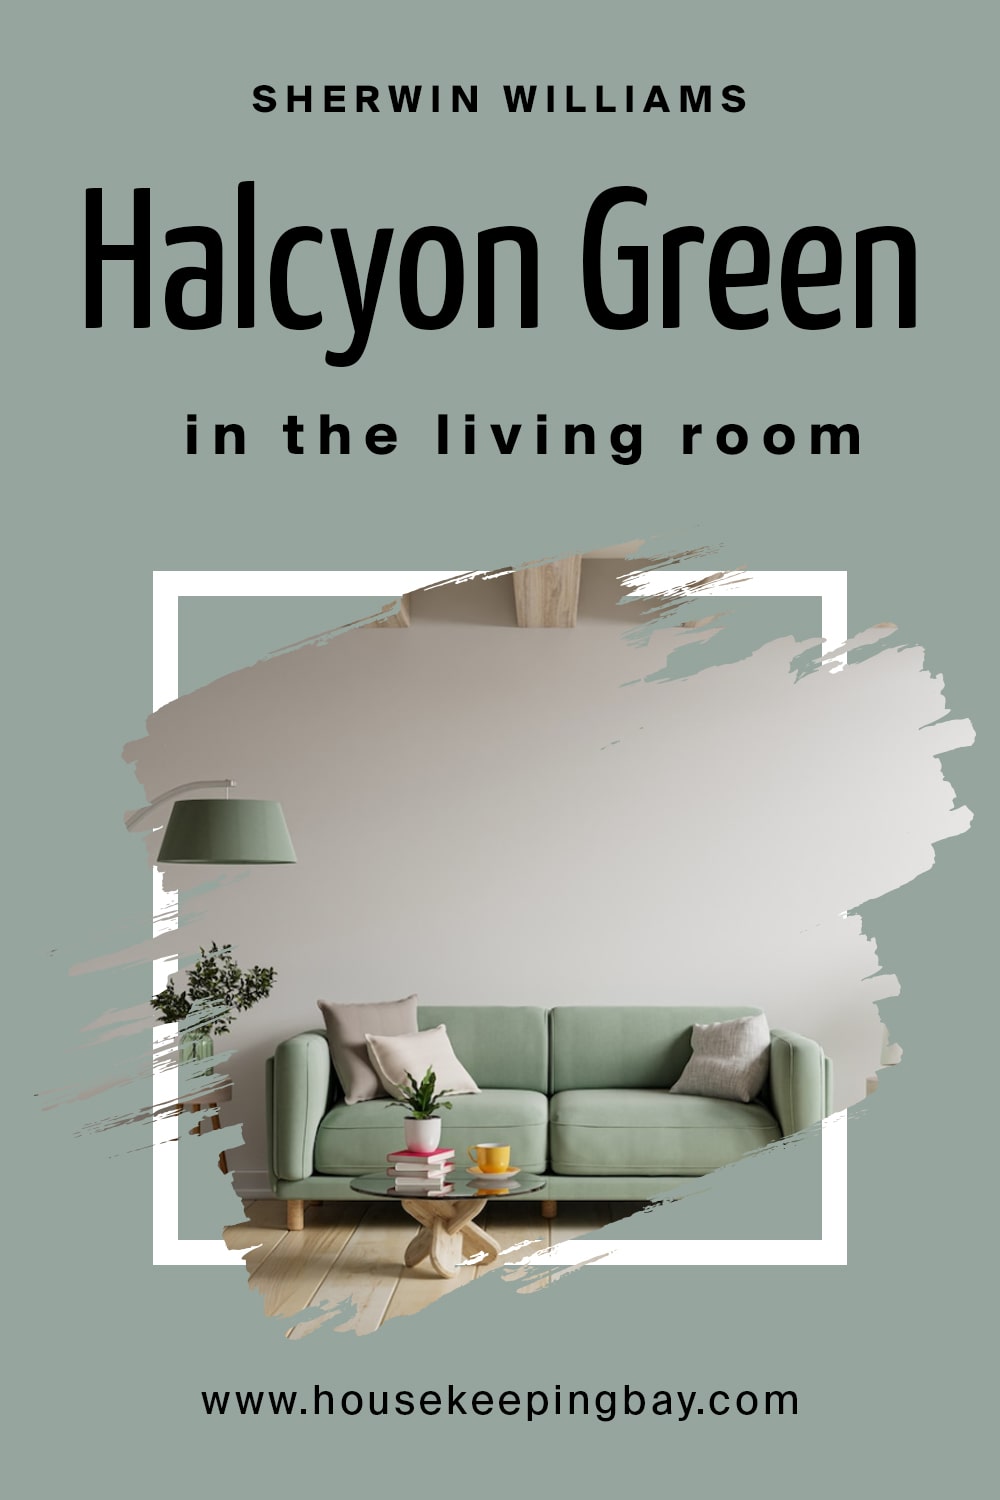 Sherwin Williams. Halcyon Green In the Living Room